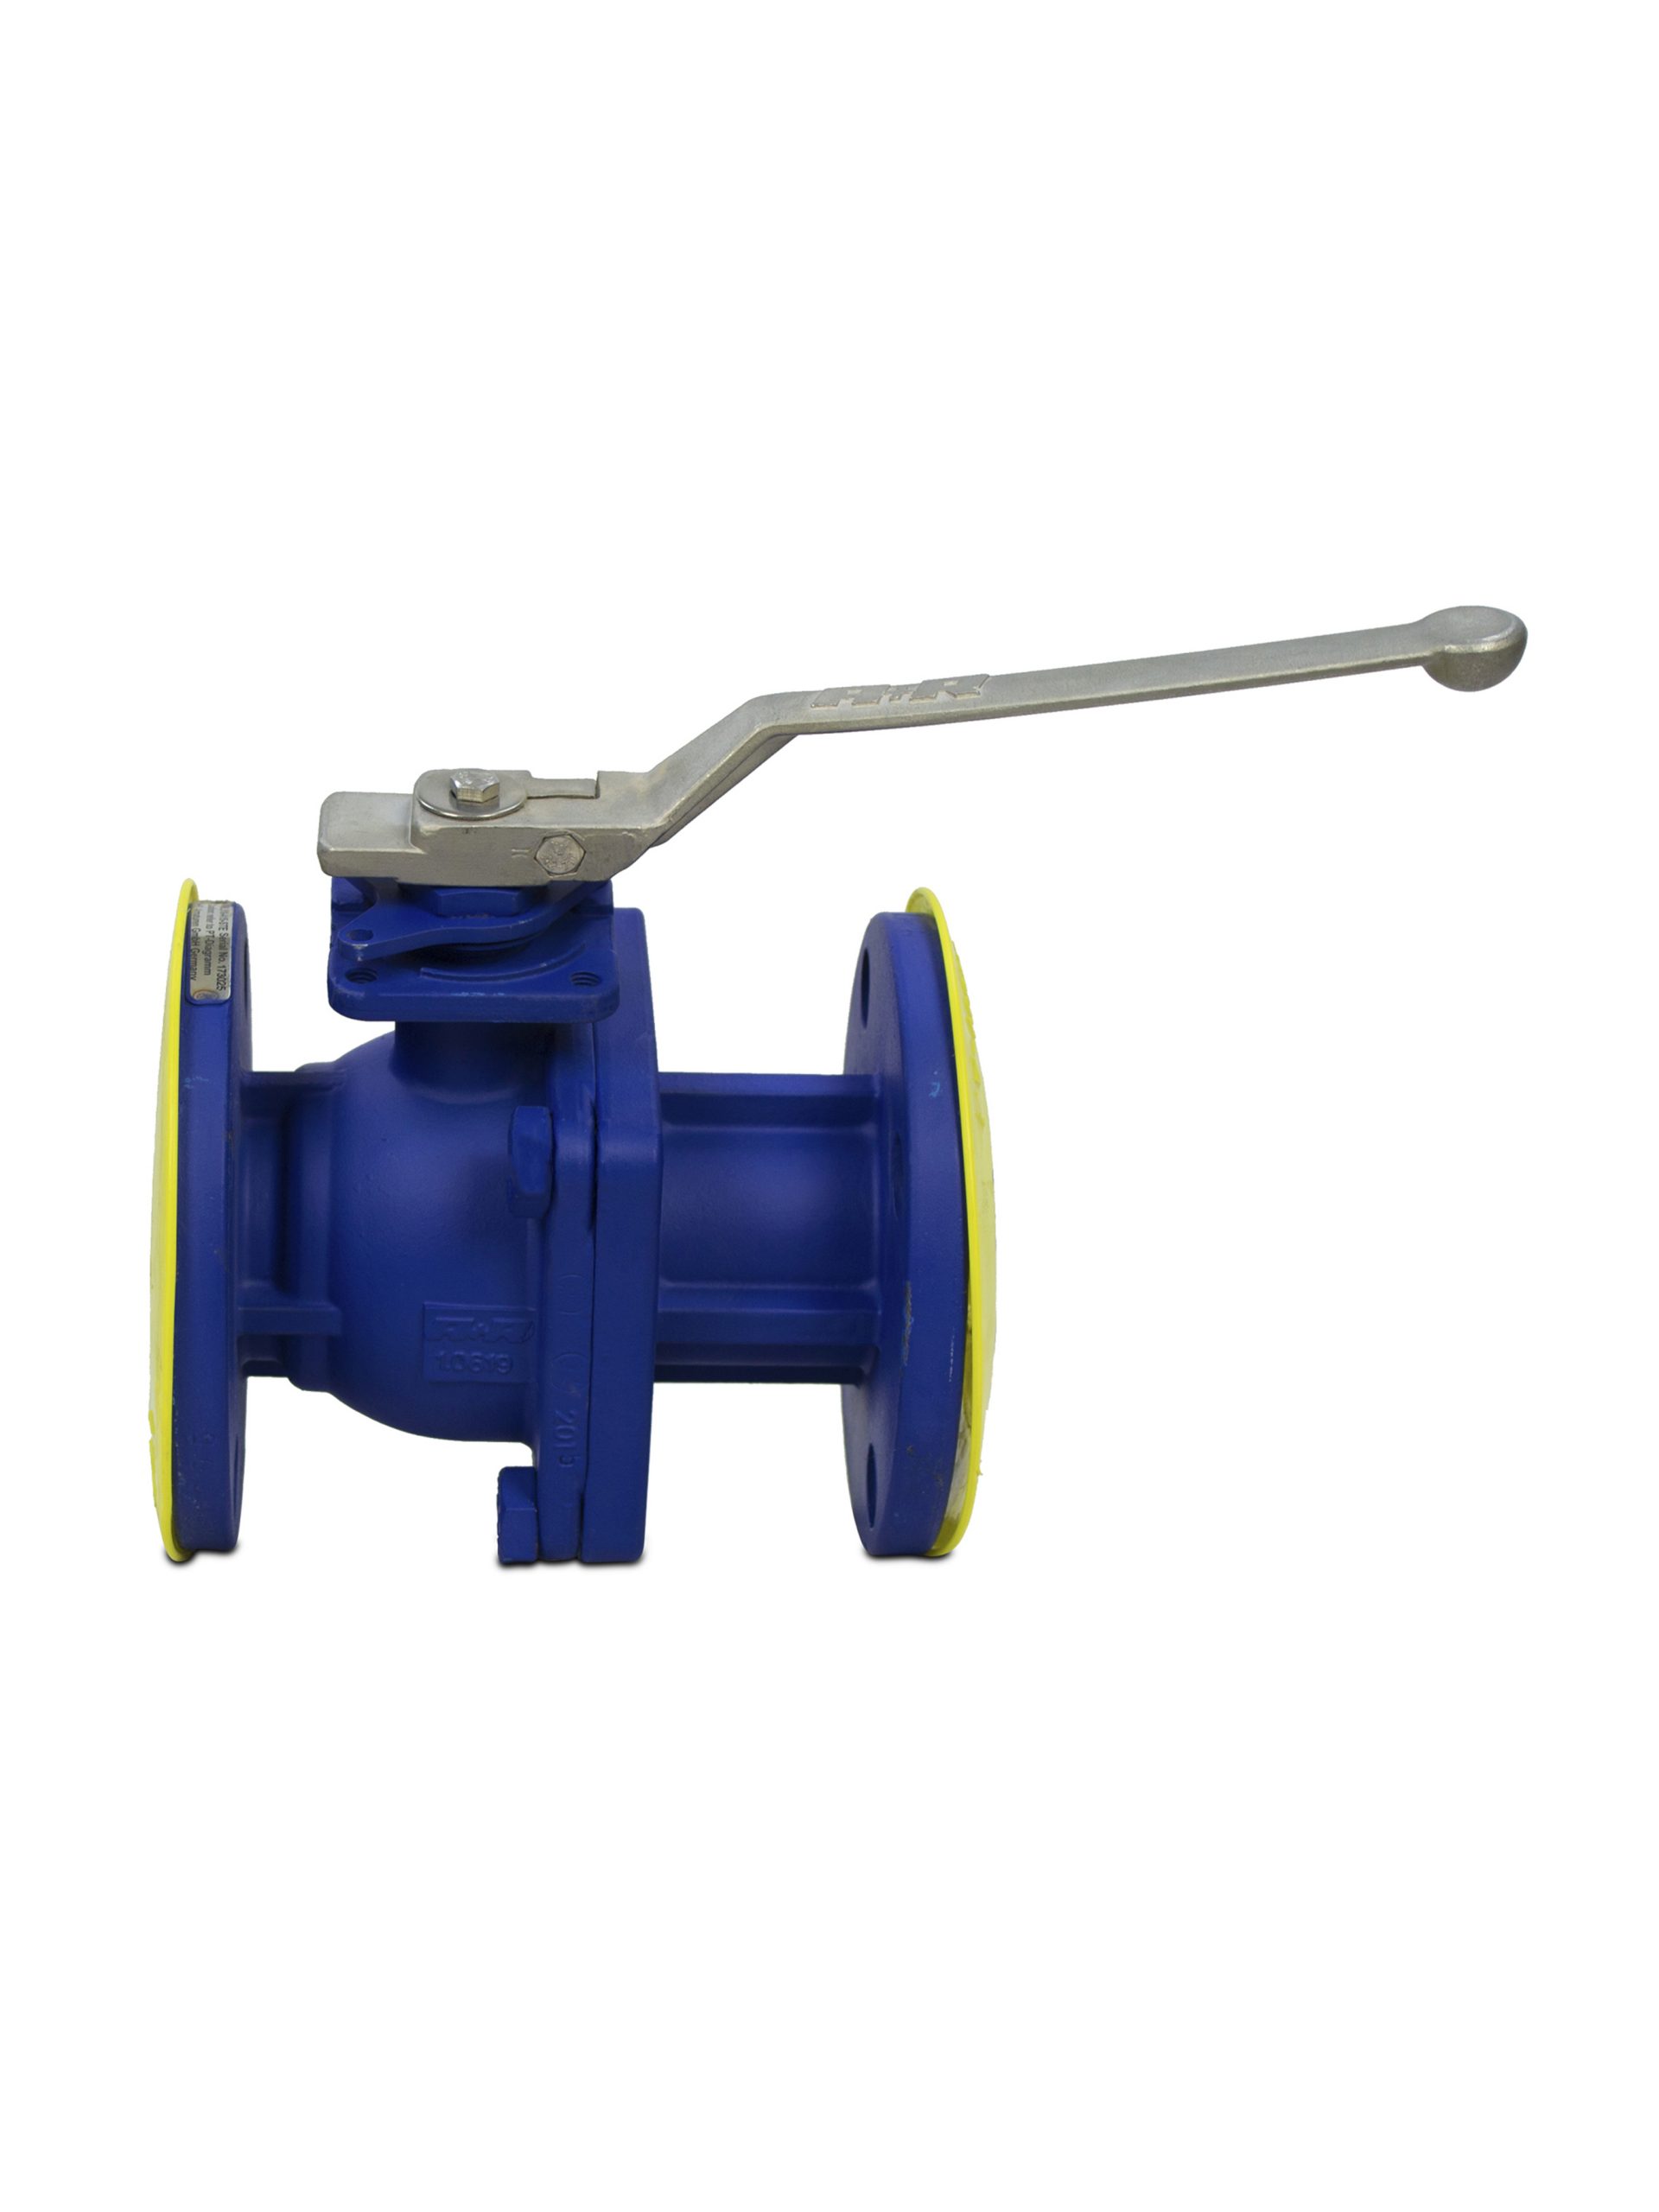 BALL VALVE 4 Inches DN100 FLANGE TYPE